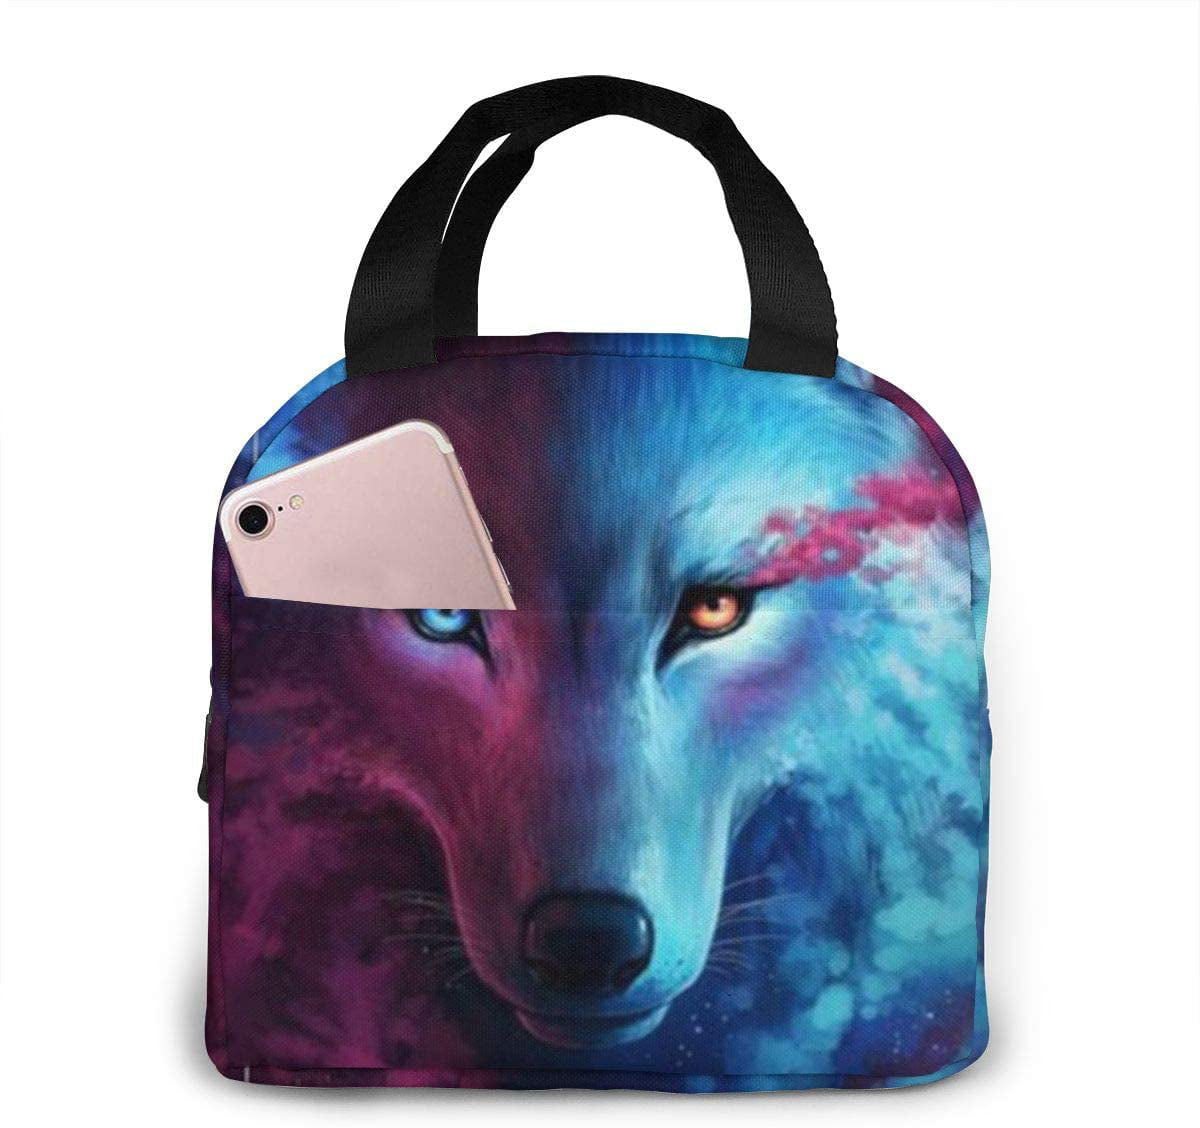 Wolf Lunch Box for Kids Girls Boys Freezable Insulated Lunch Bag Cooler Zipper Meal Tote for School Picnic